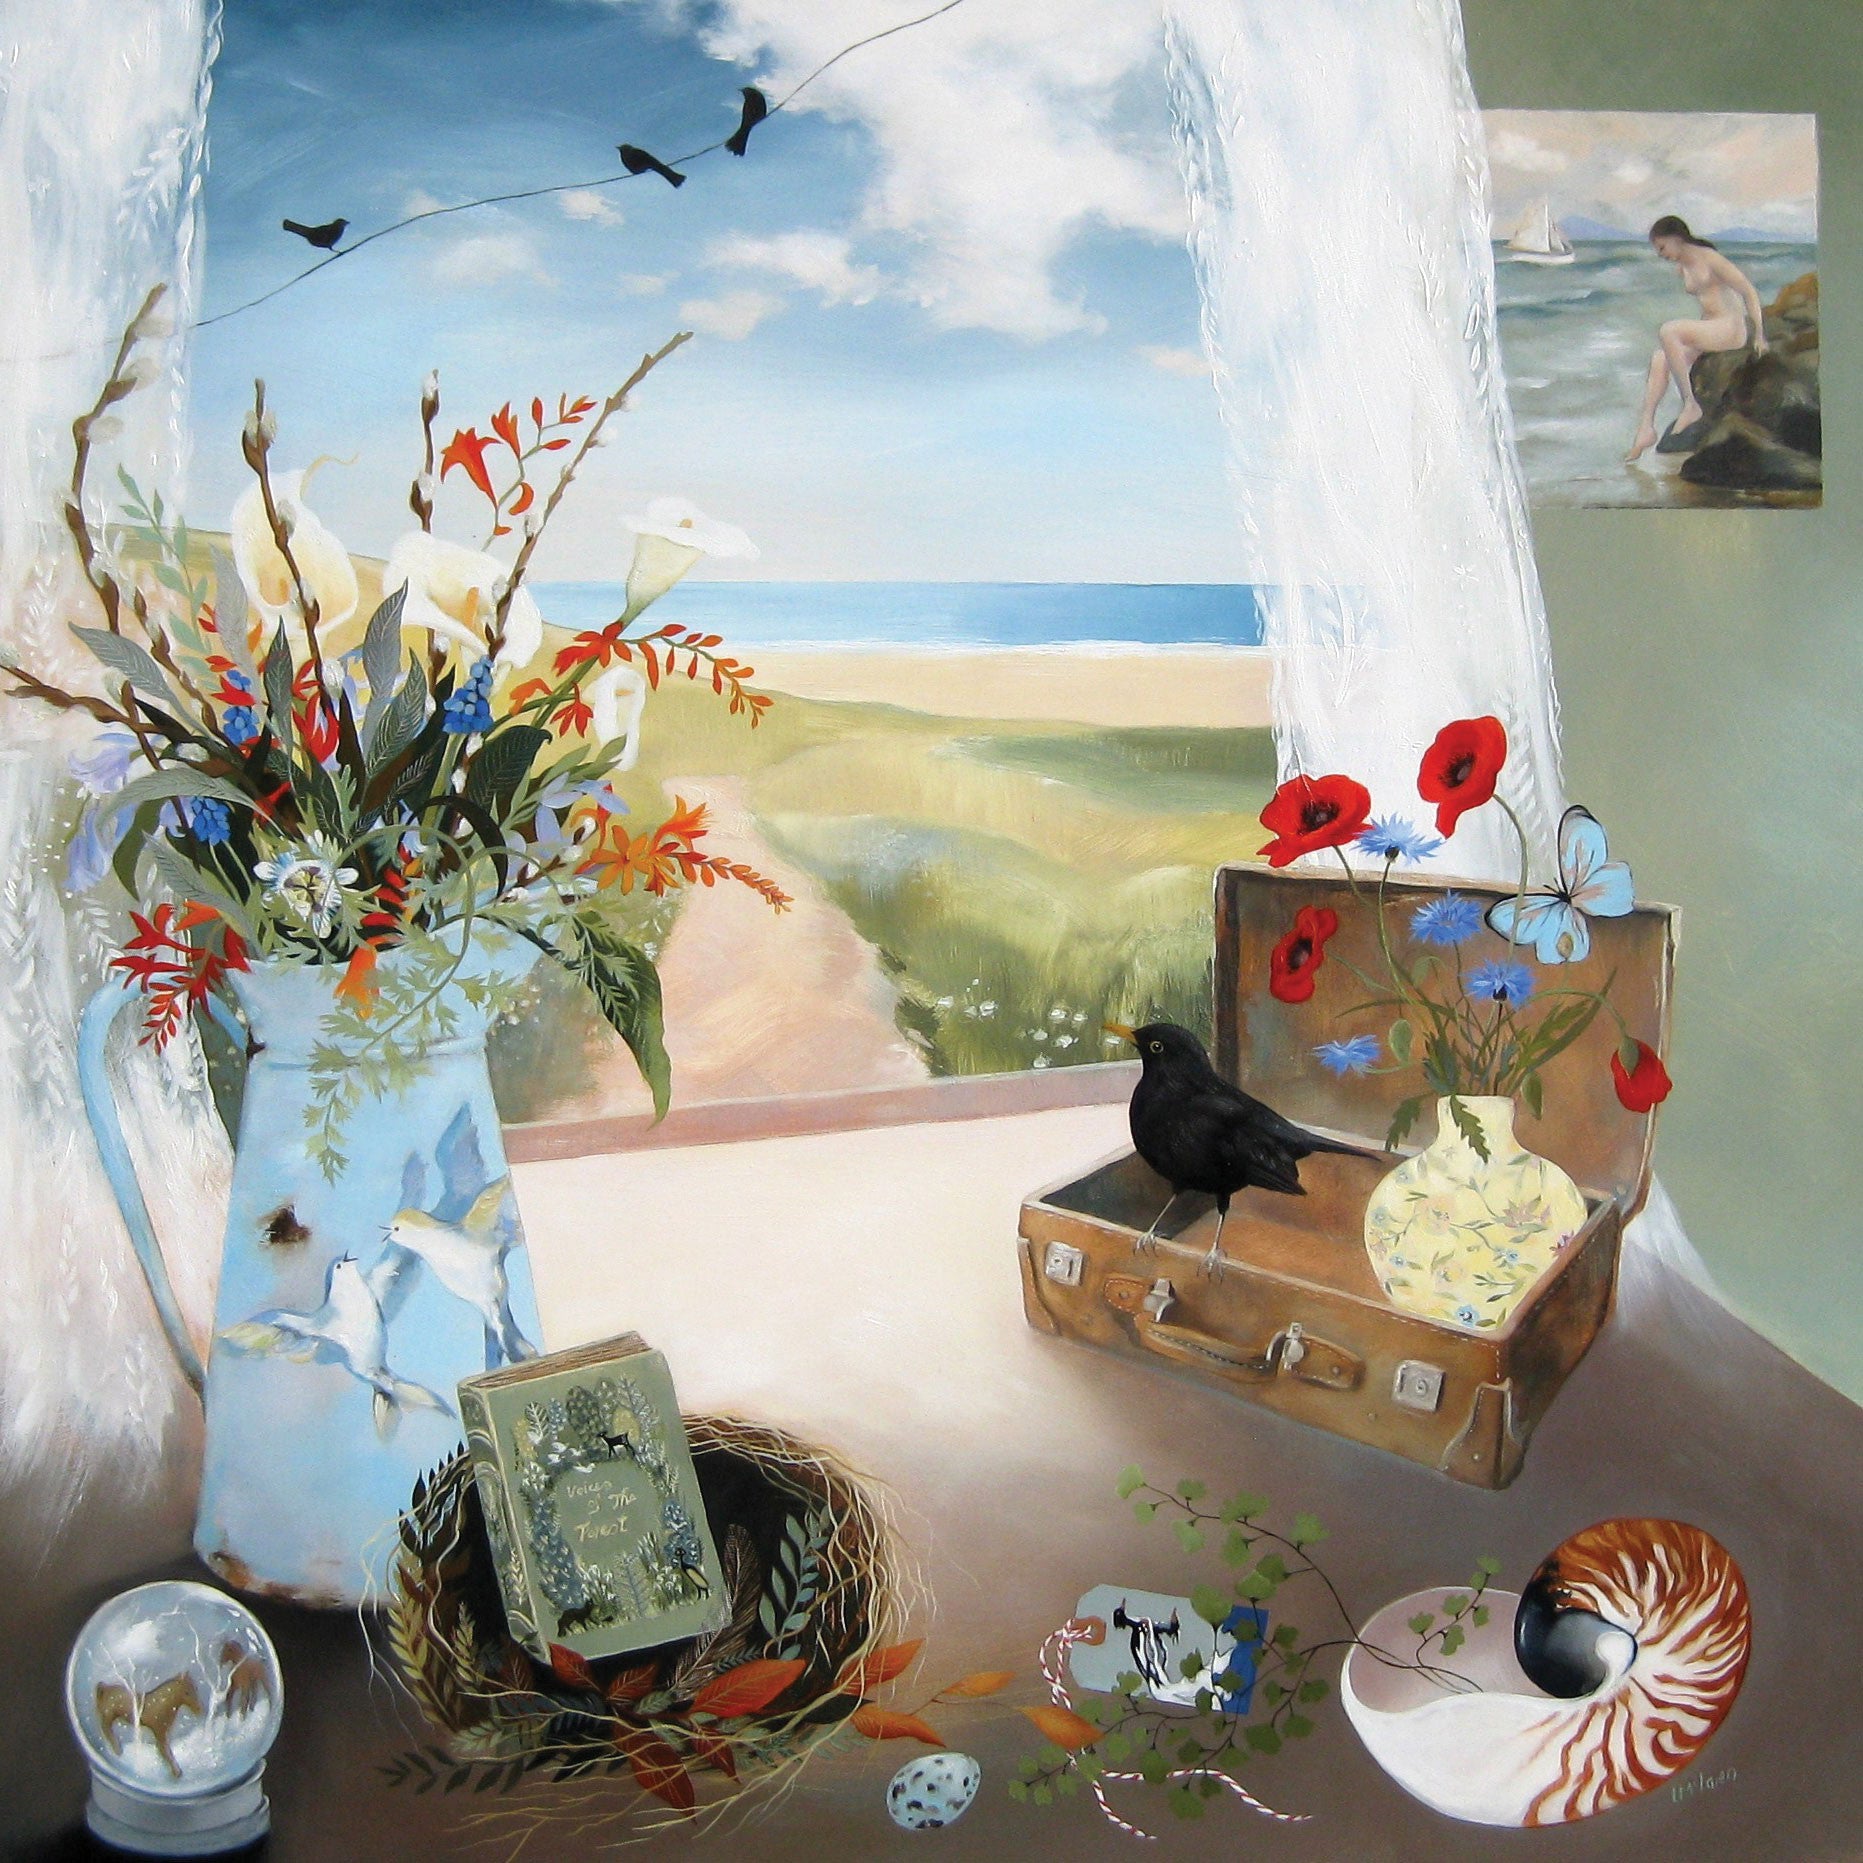 First Day of Summer by Lesley McLaren, Fine Art Greeting Card, Oil on Gesso Panel, Window scene with flower vases, birds, nests, shells